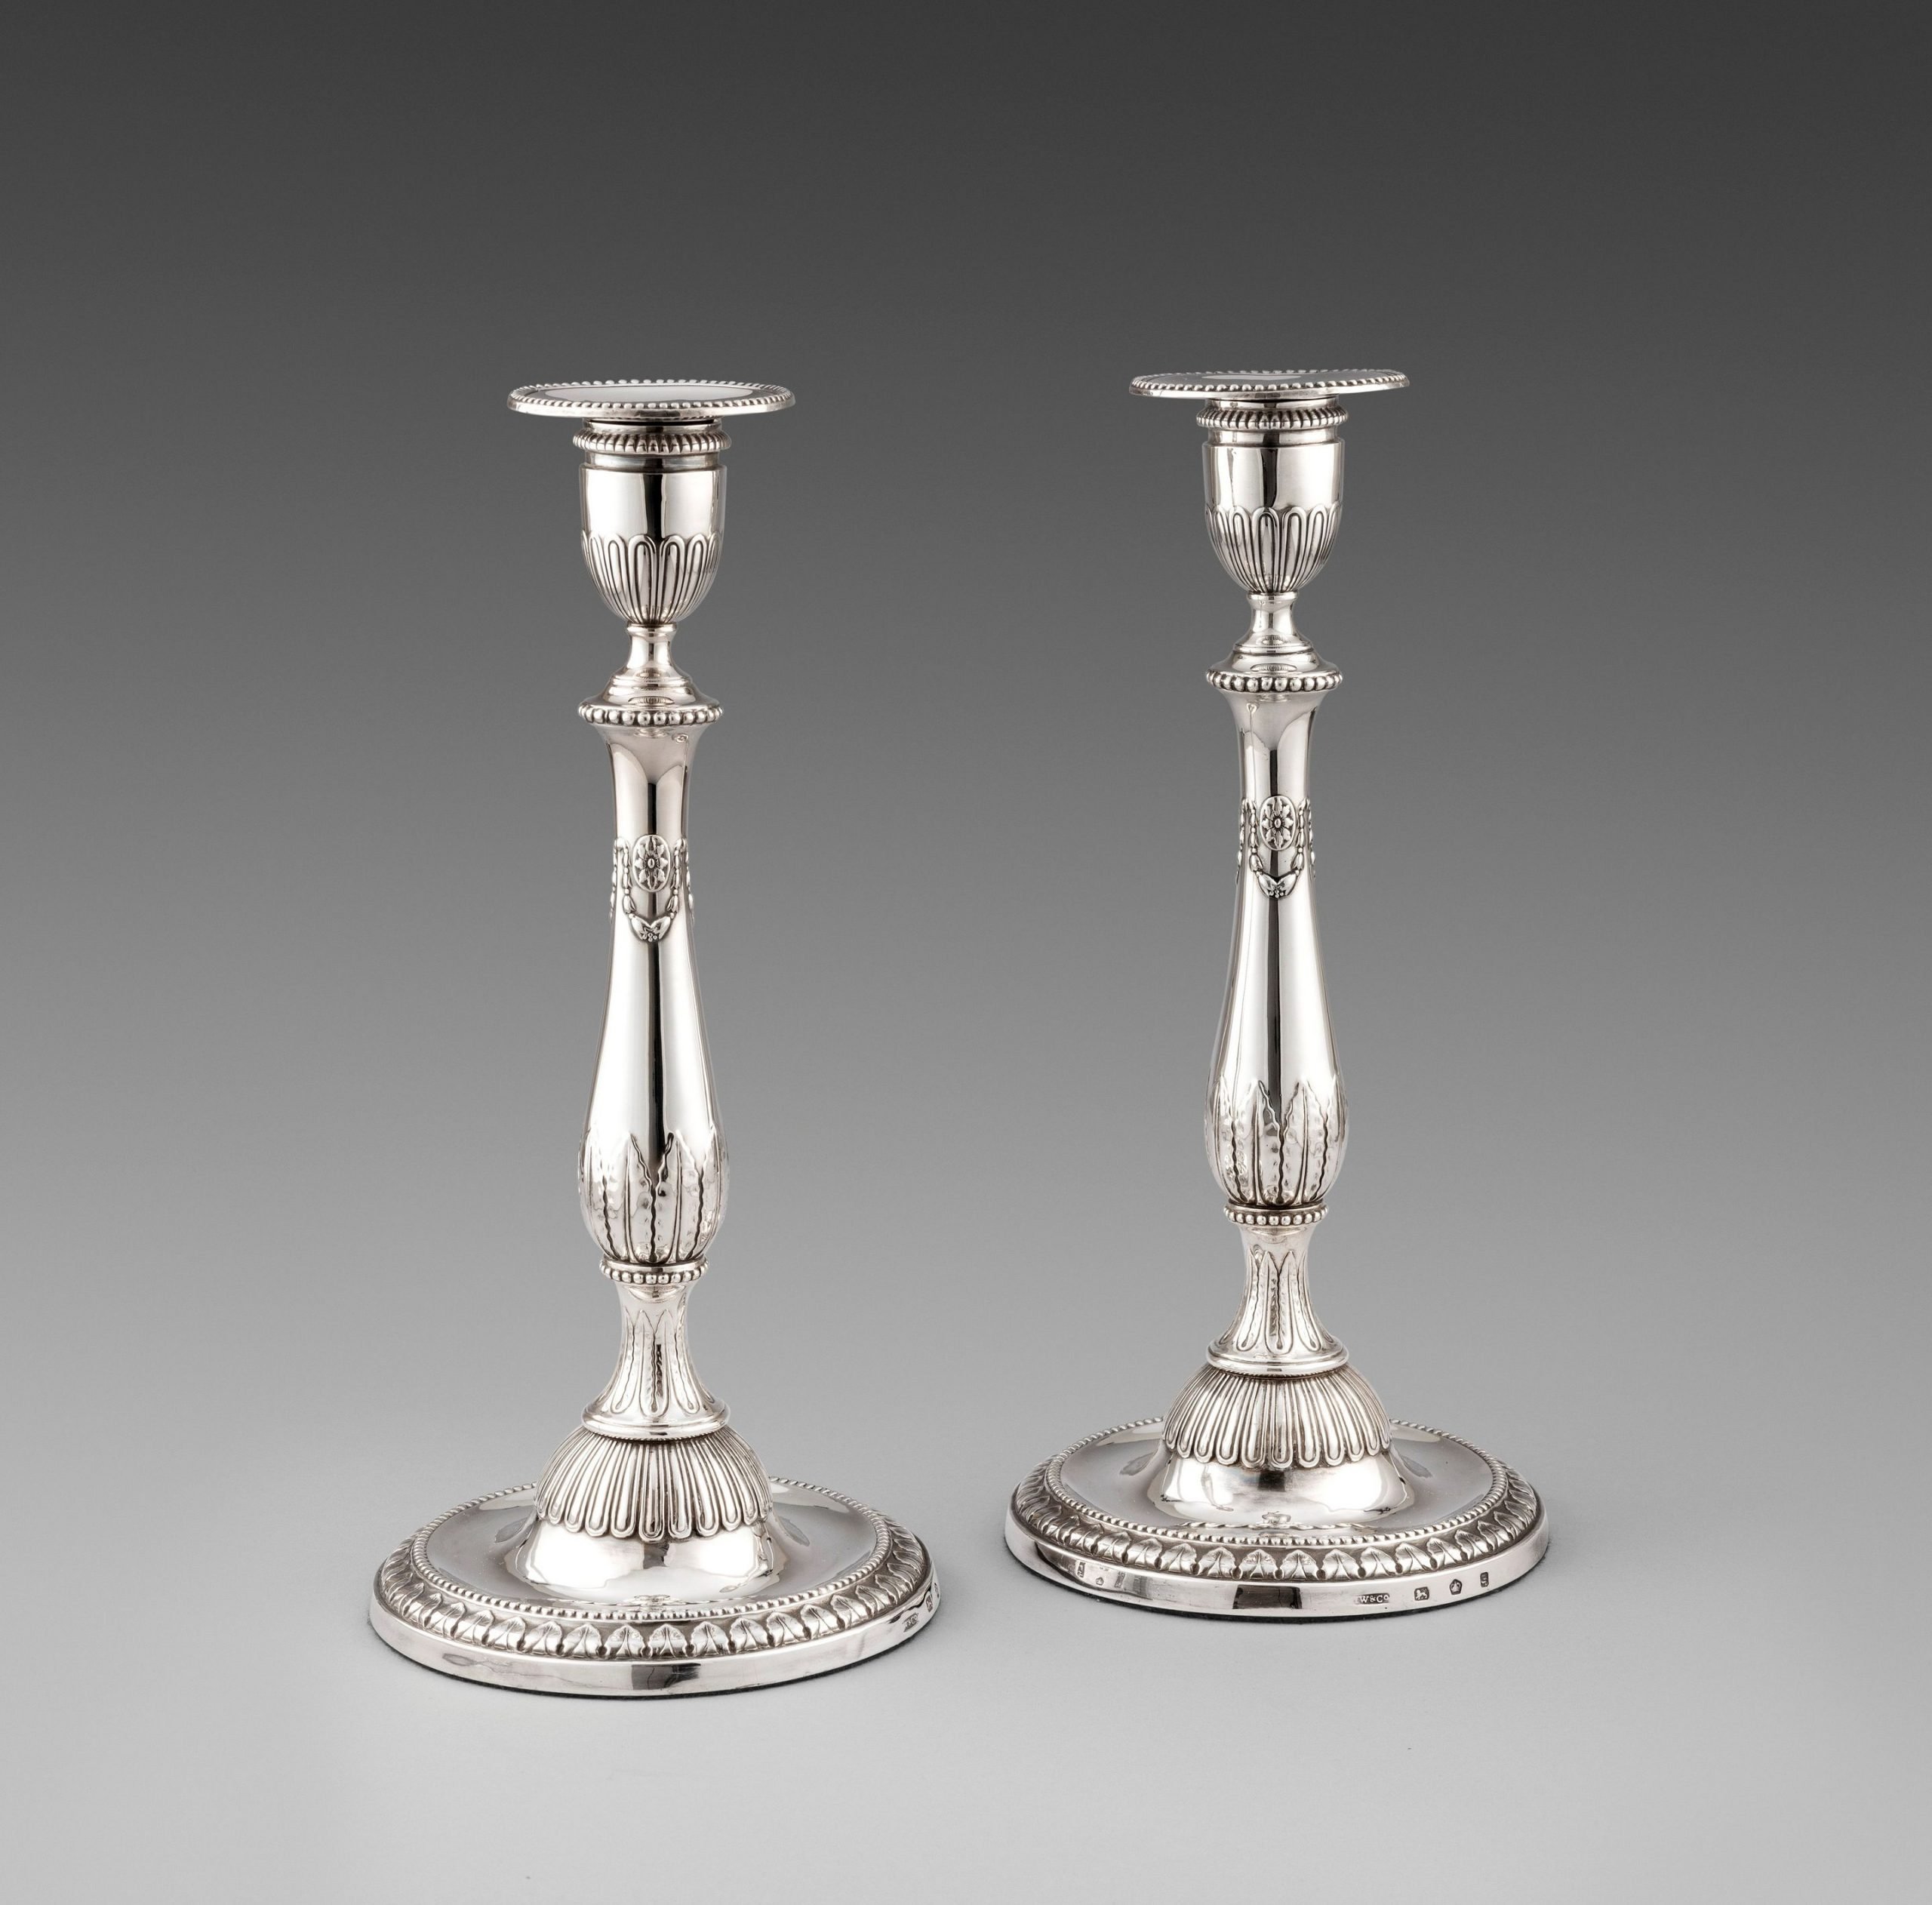 Pair of Antique Silver George III Candlesticks 1778 1